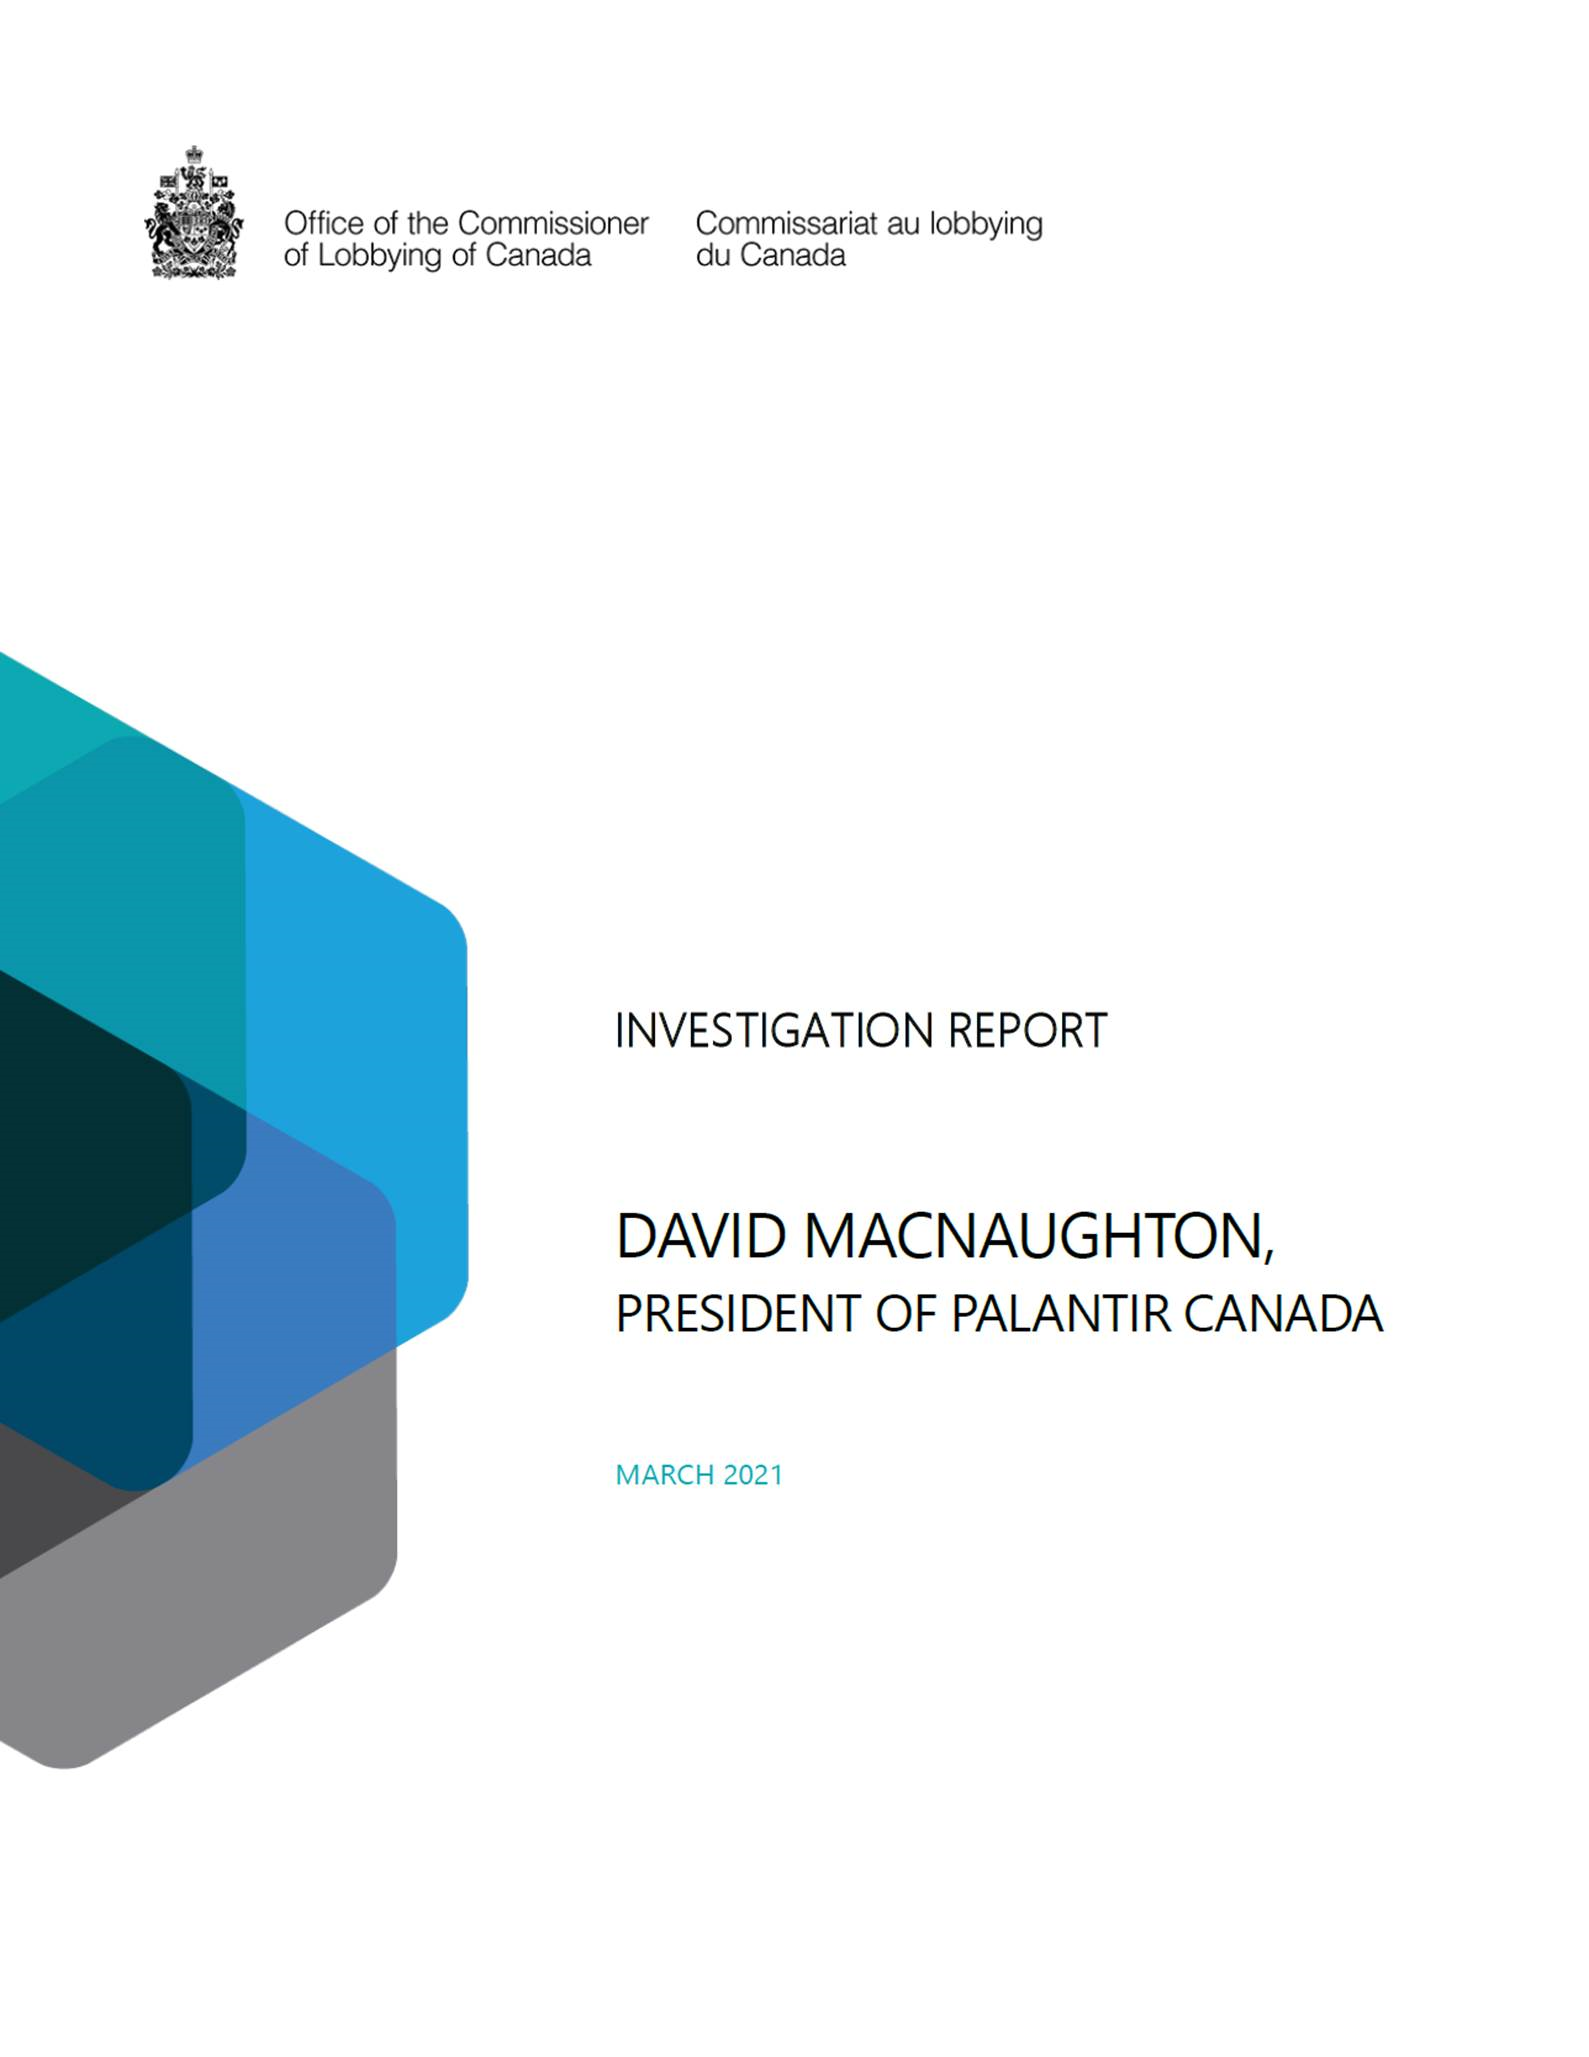 Cover of the investigation report on David MacNaughton